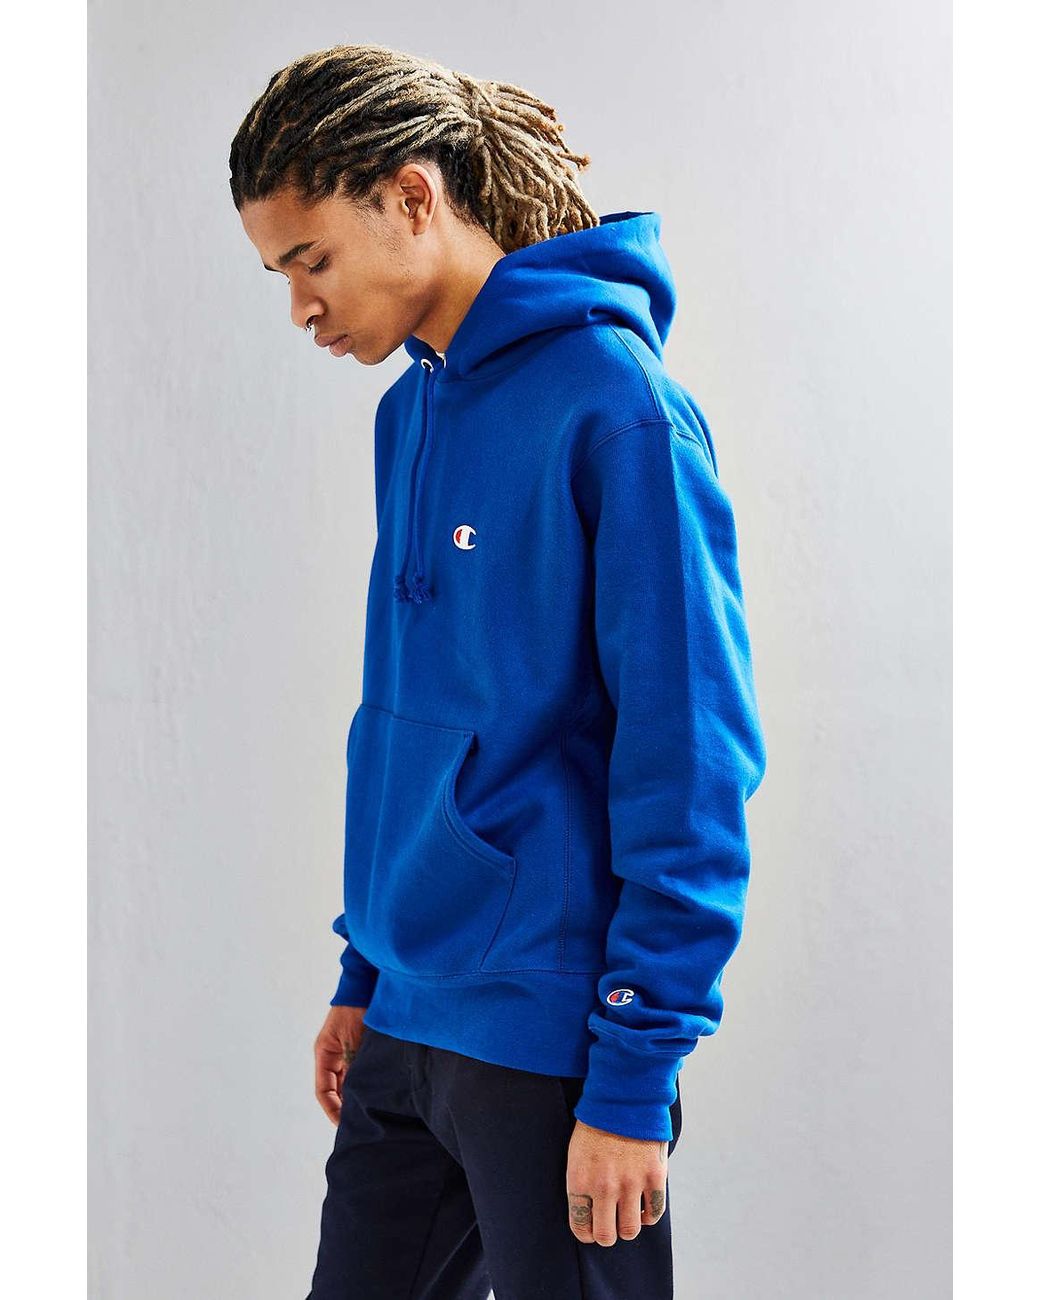 Champion Reverse Weave Quarter Zip Hoodie Living in Blue - Size S